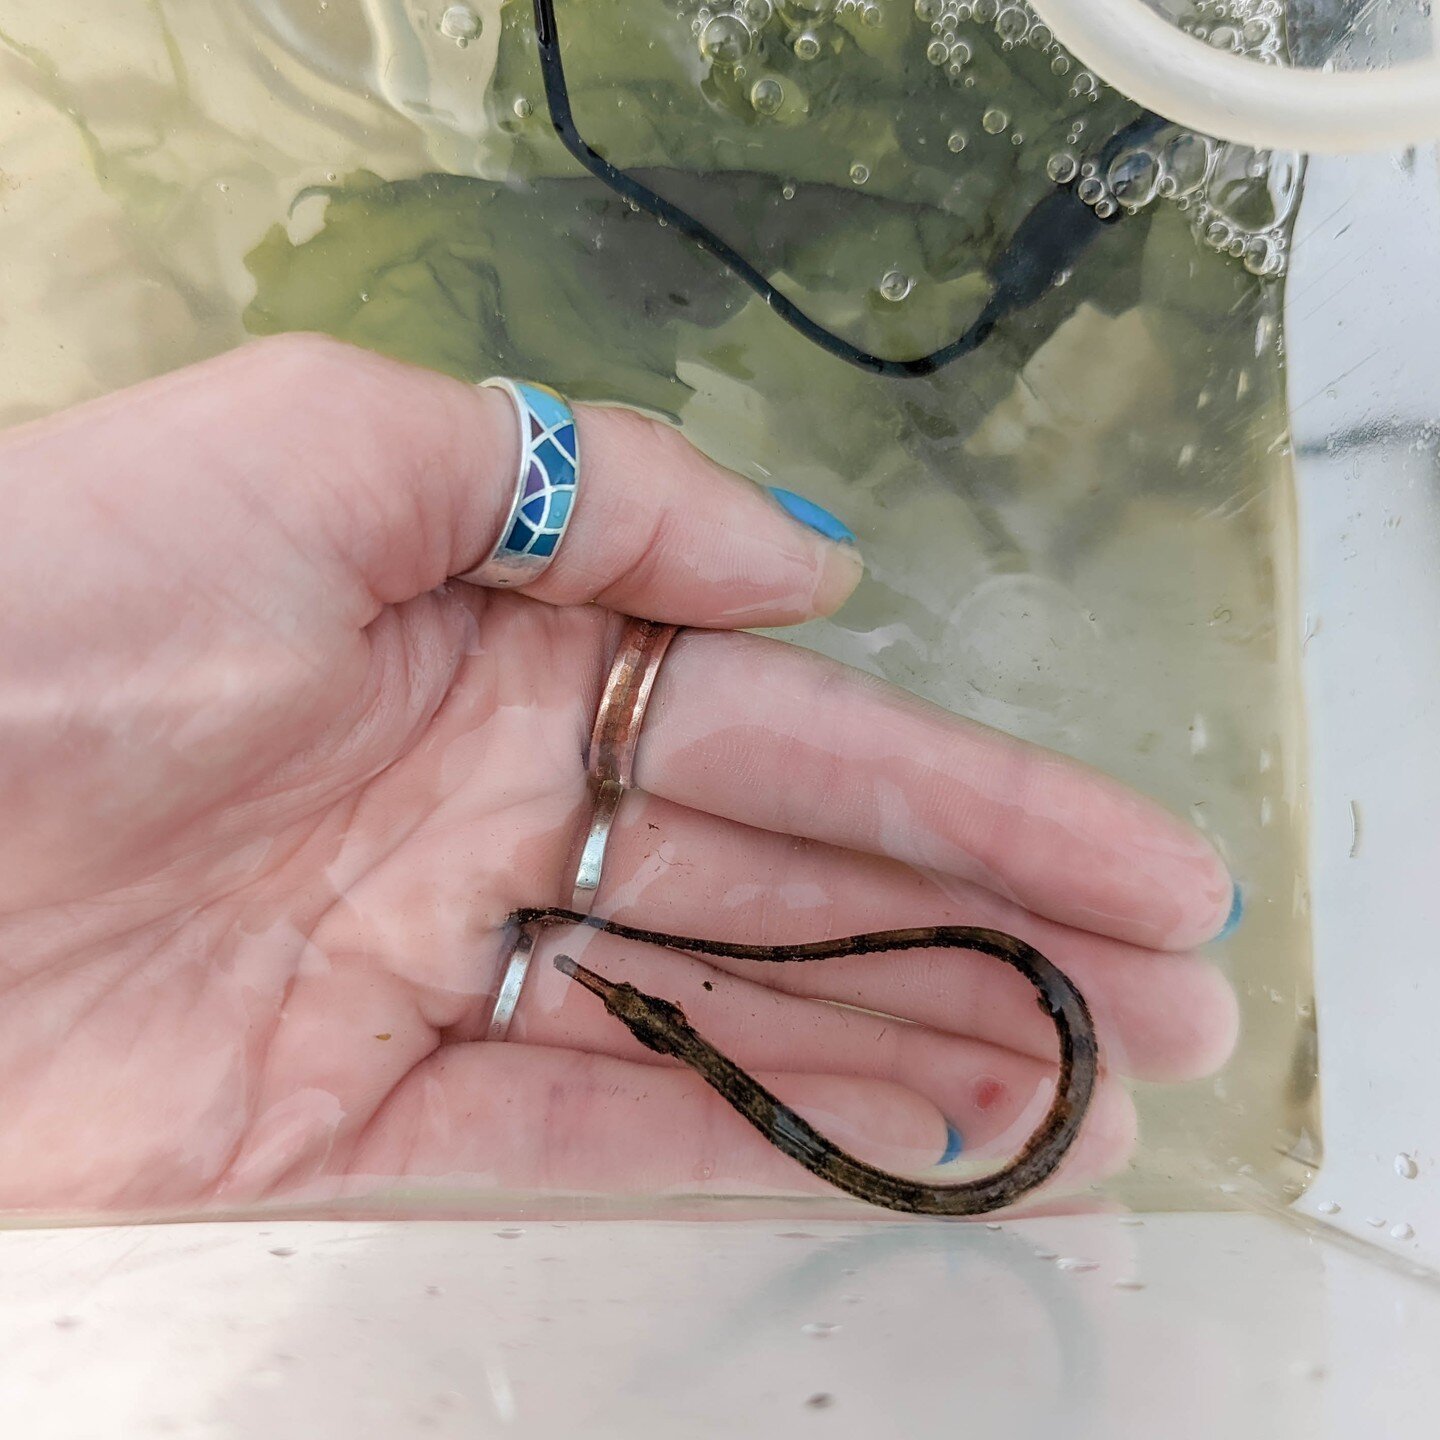 Any pipefish fans?! This #FishyFriday is for you 🐟. Pipefish can be found all over New York Harbor. These slender, elongated fish are actually a type of seahorse and belong to the Syngnathidae family. They use their long snouts to suck up small crus